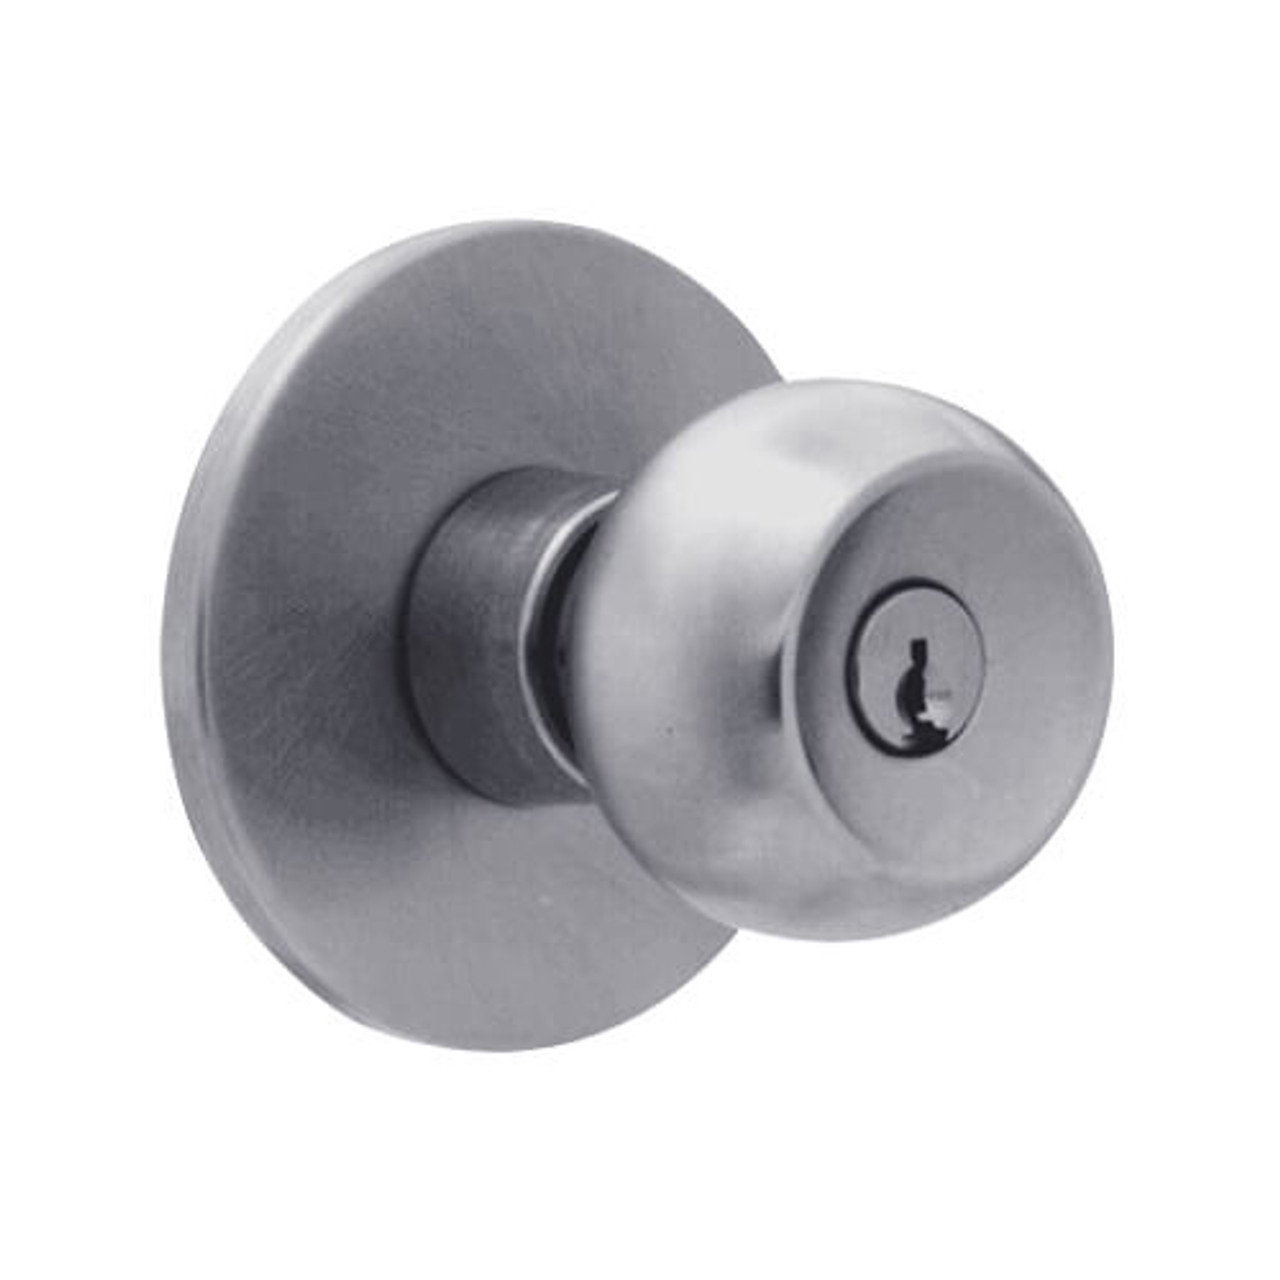 X511PD-TY-626 Falcon X Series Cylindrical Entry/Office Lock with Troy-York Knob Style in Satin Chrome Finish